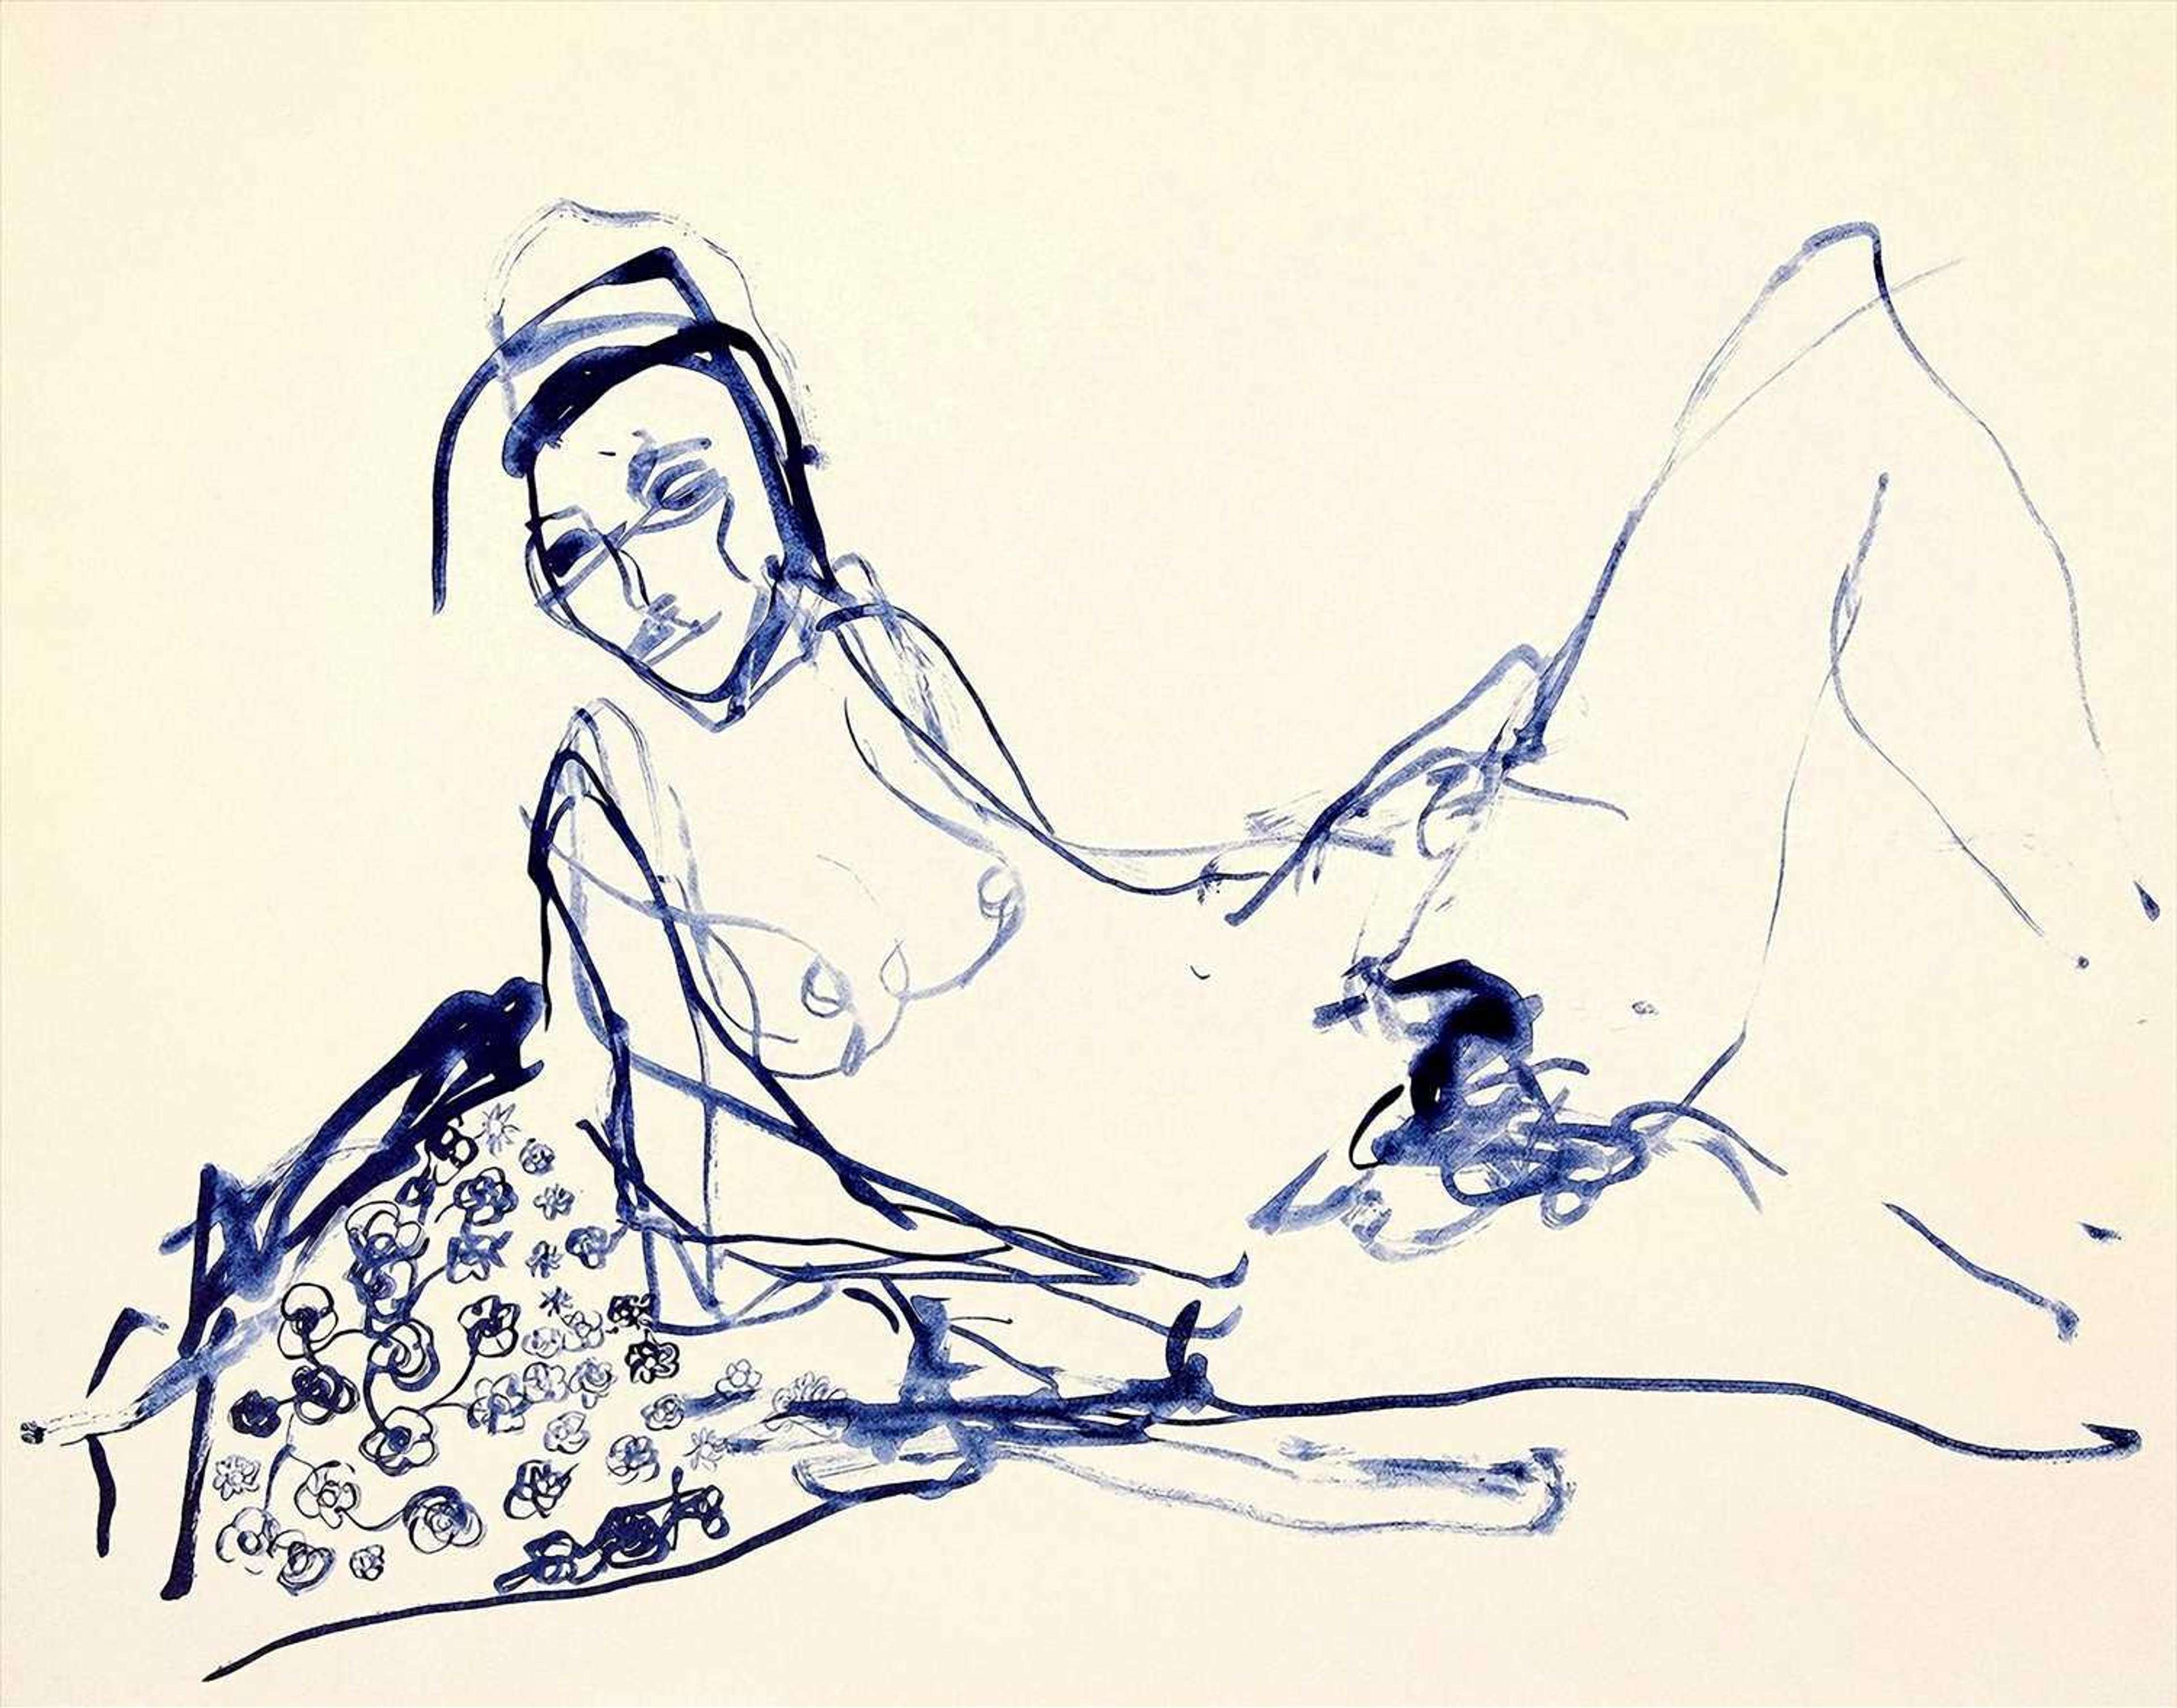 I loved my Innocence by Tracey Emin